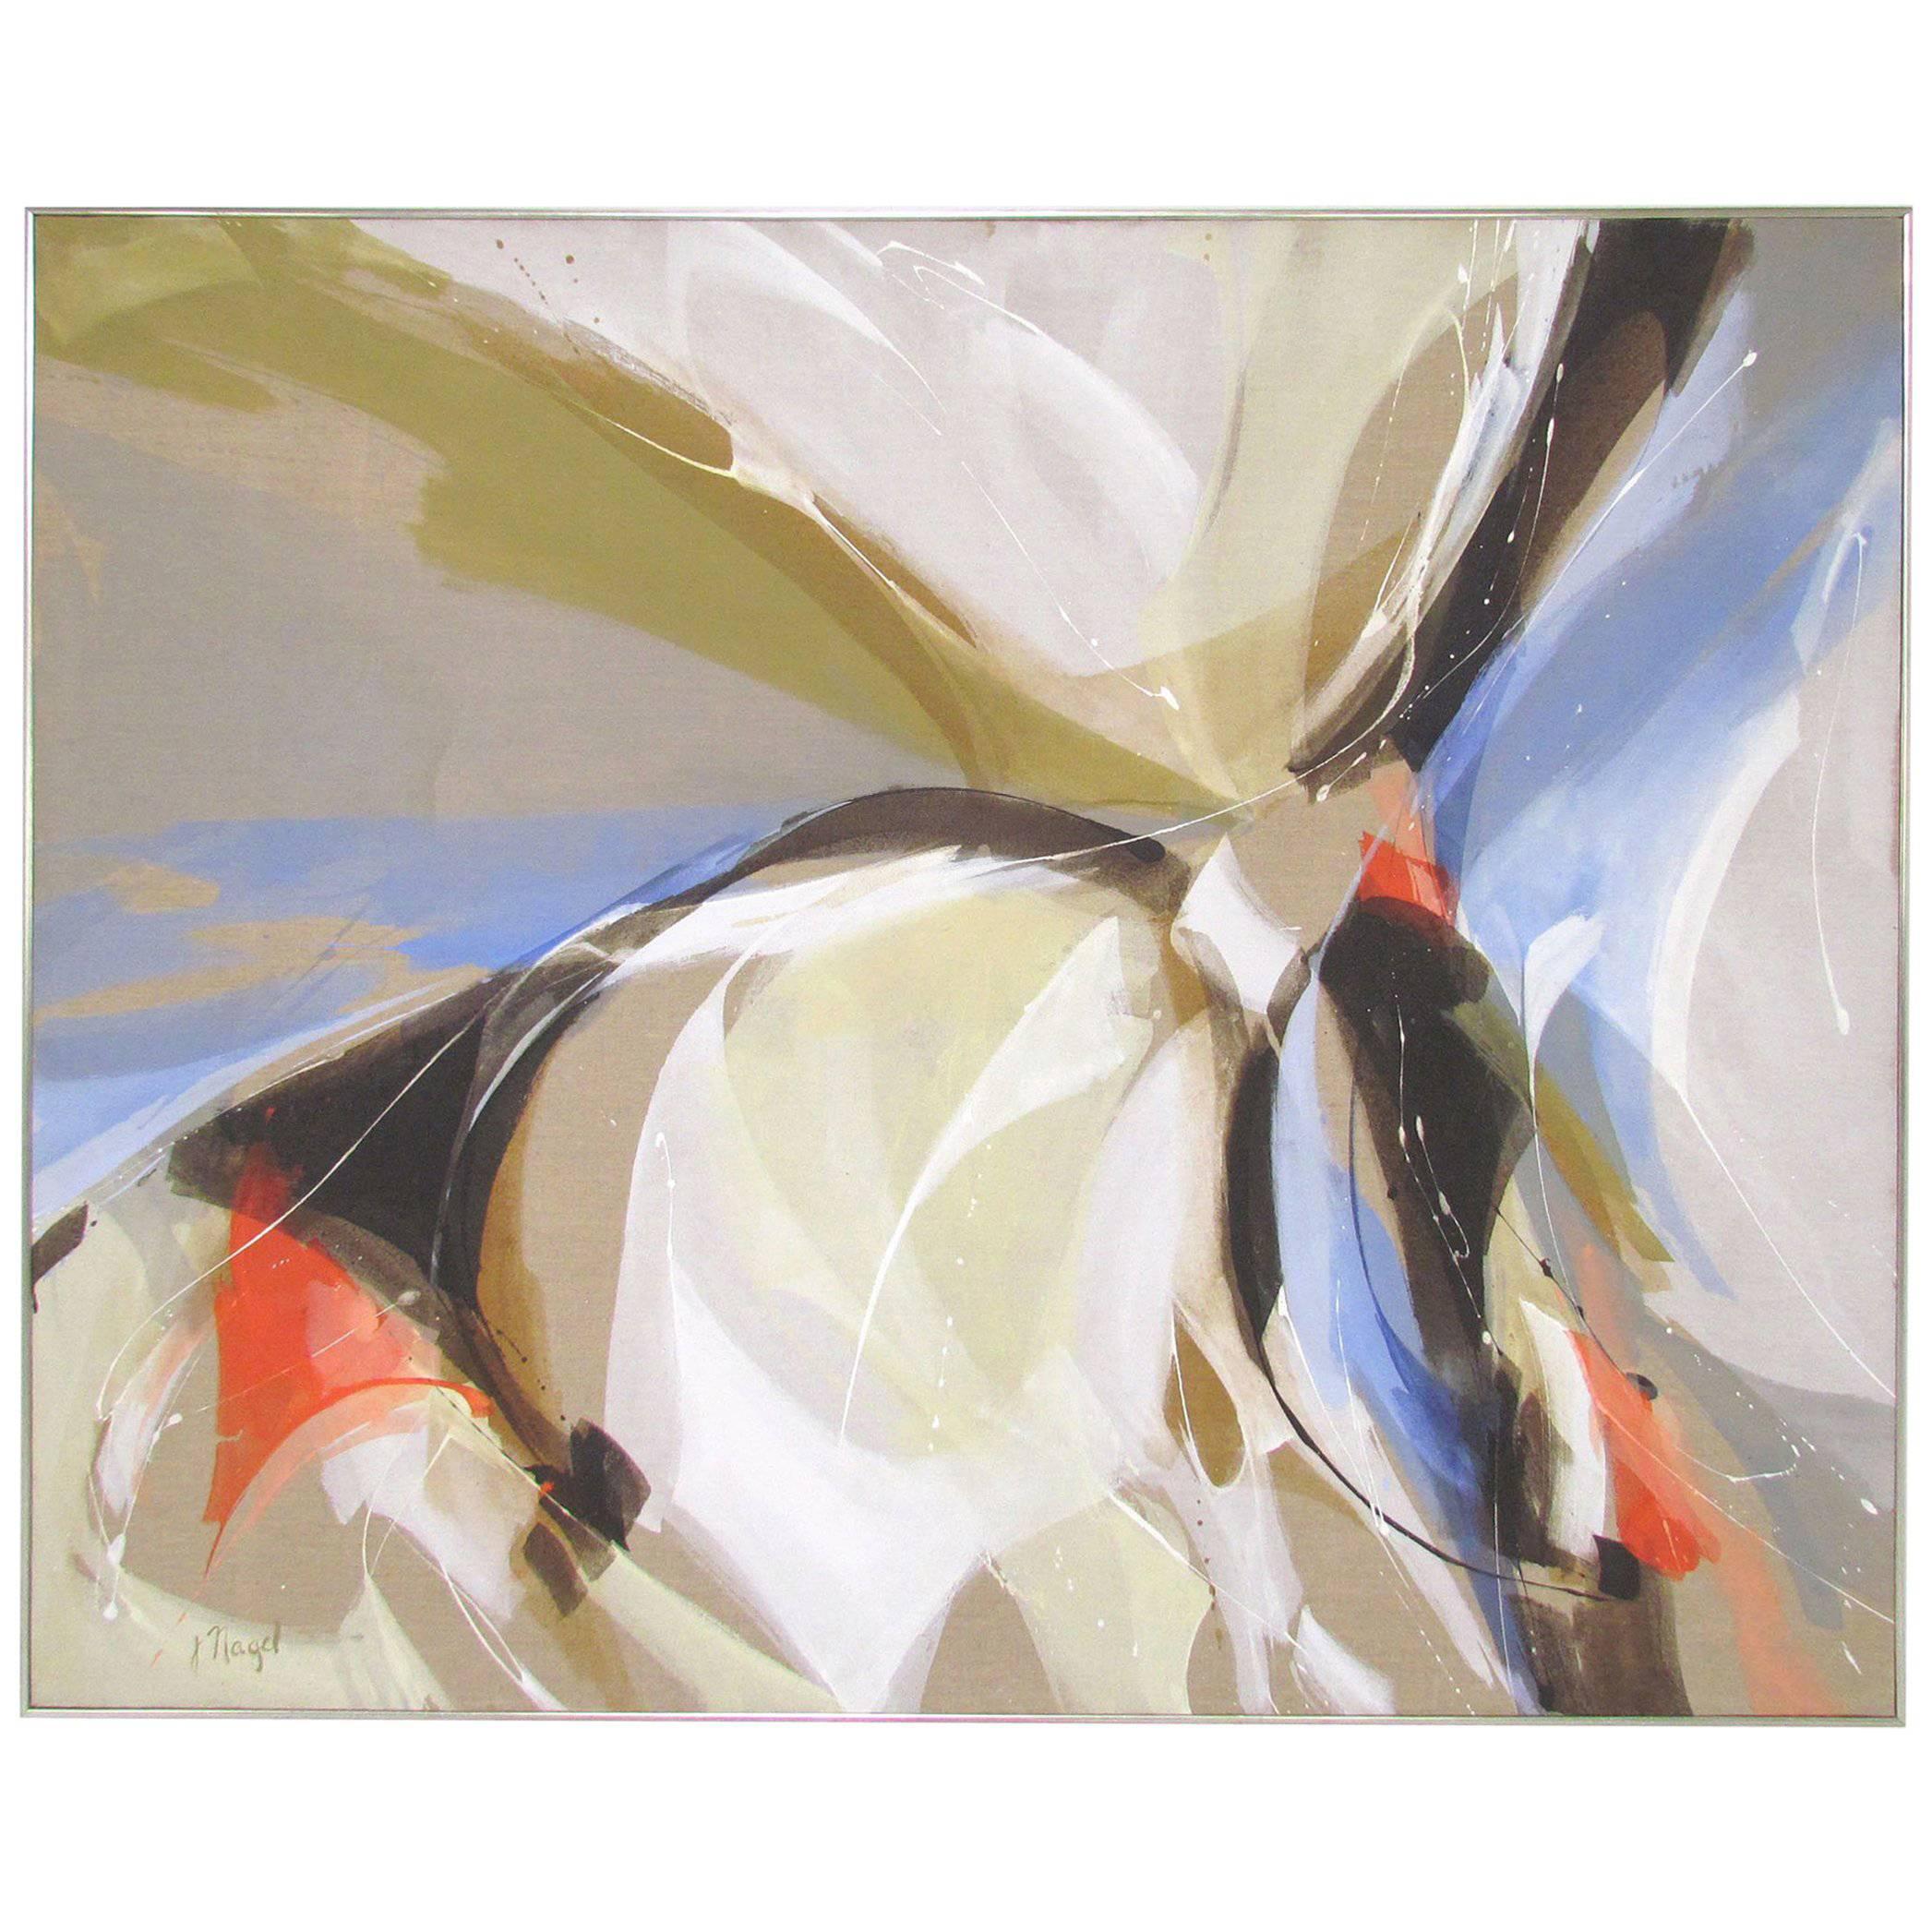 Large Abstract Painting Signed J. Nagel, circa 1970s